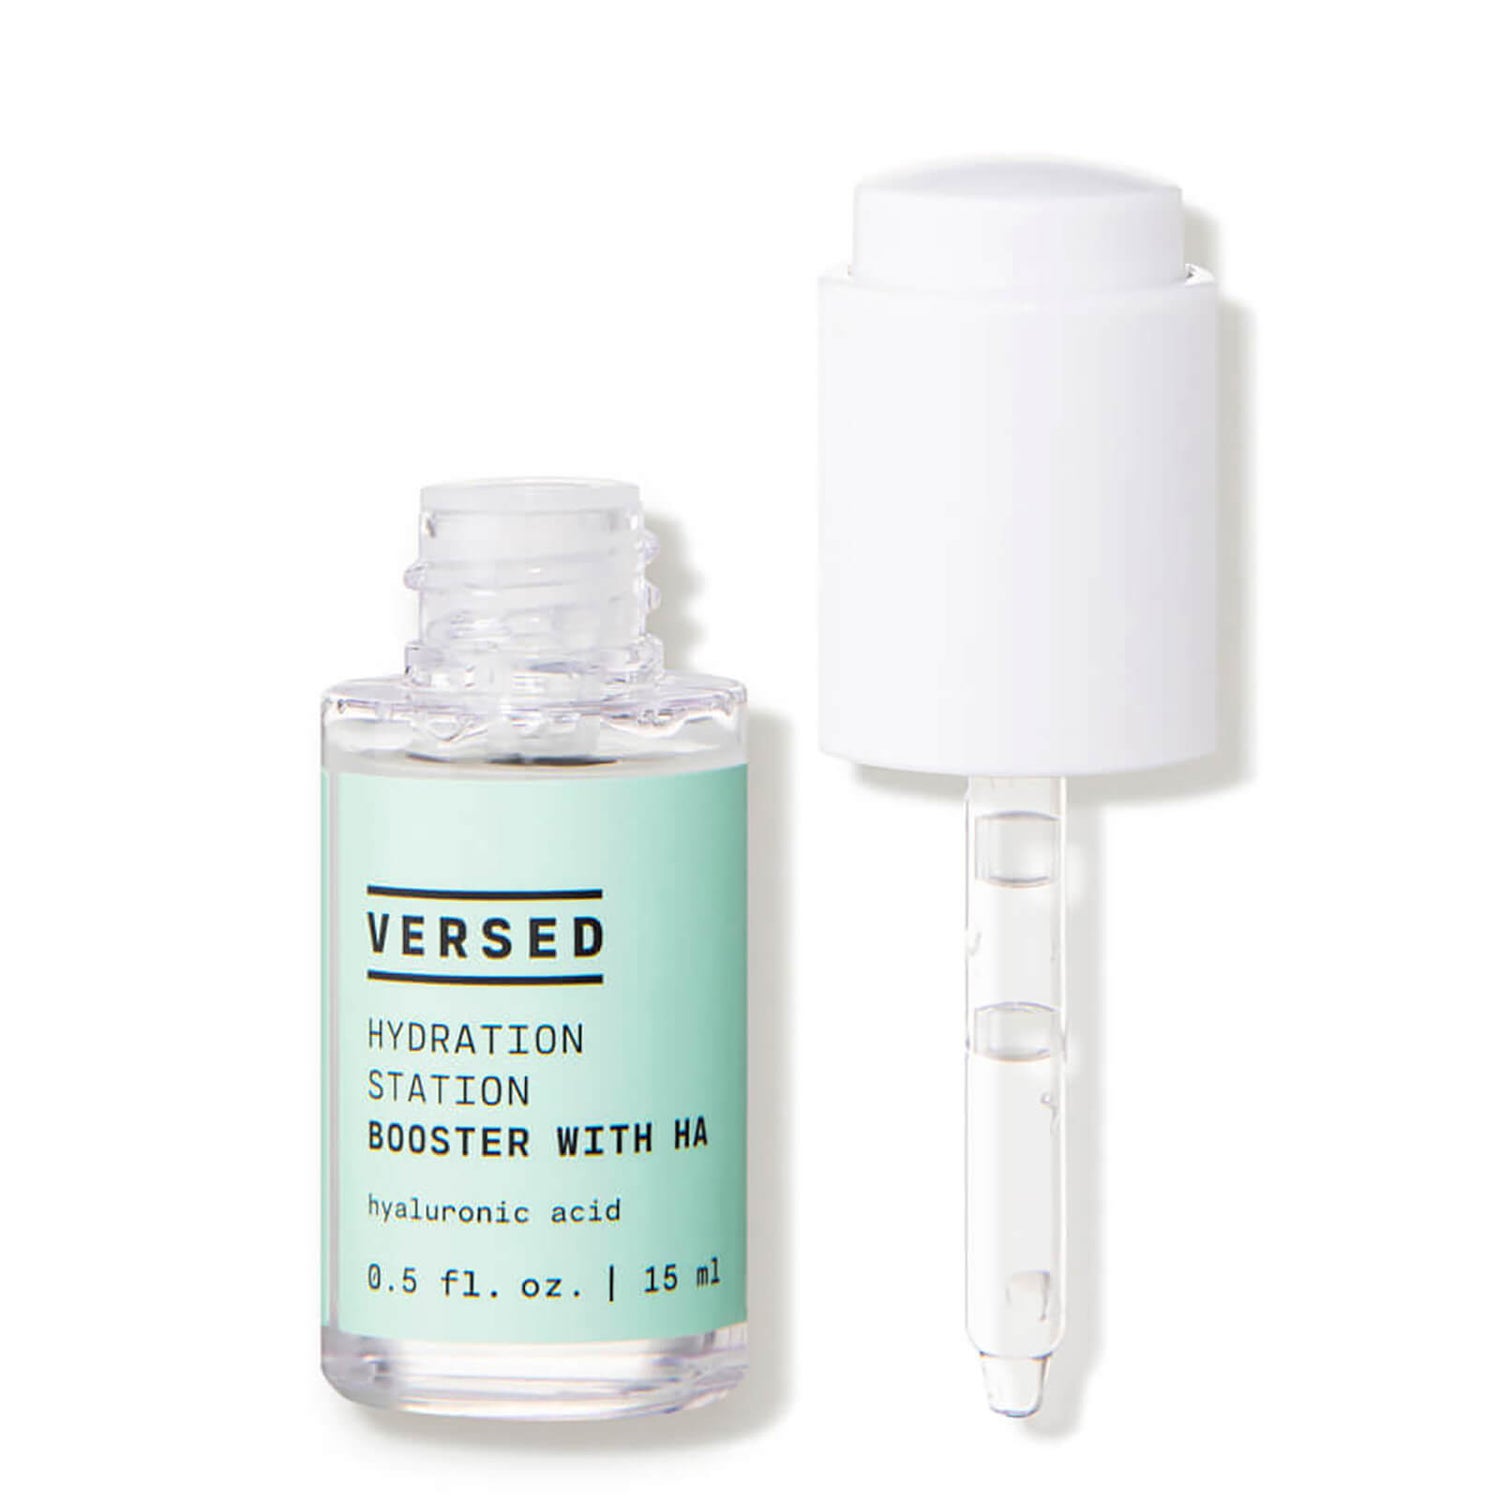 Versed Hydration Station Booster with HA 0.5 fl. oz.